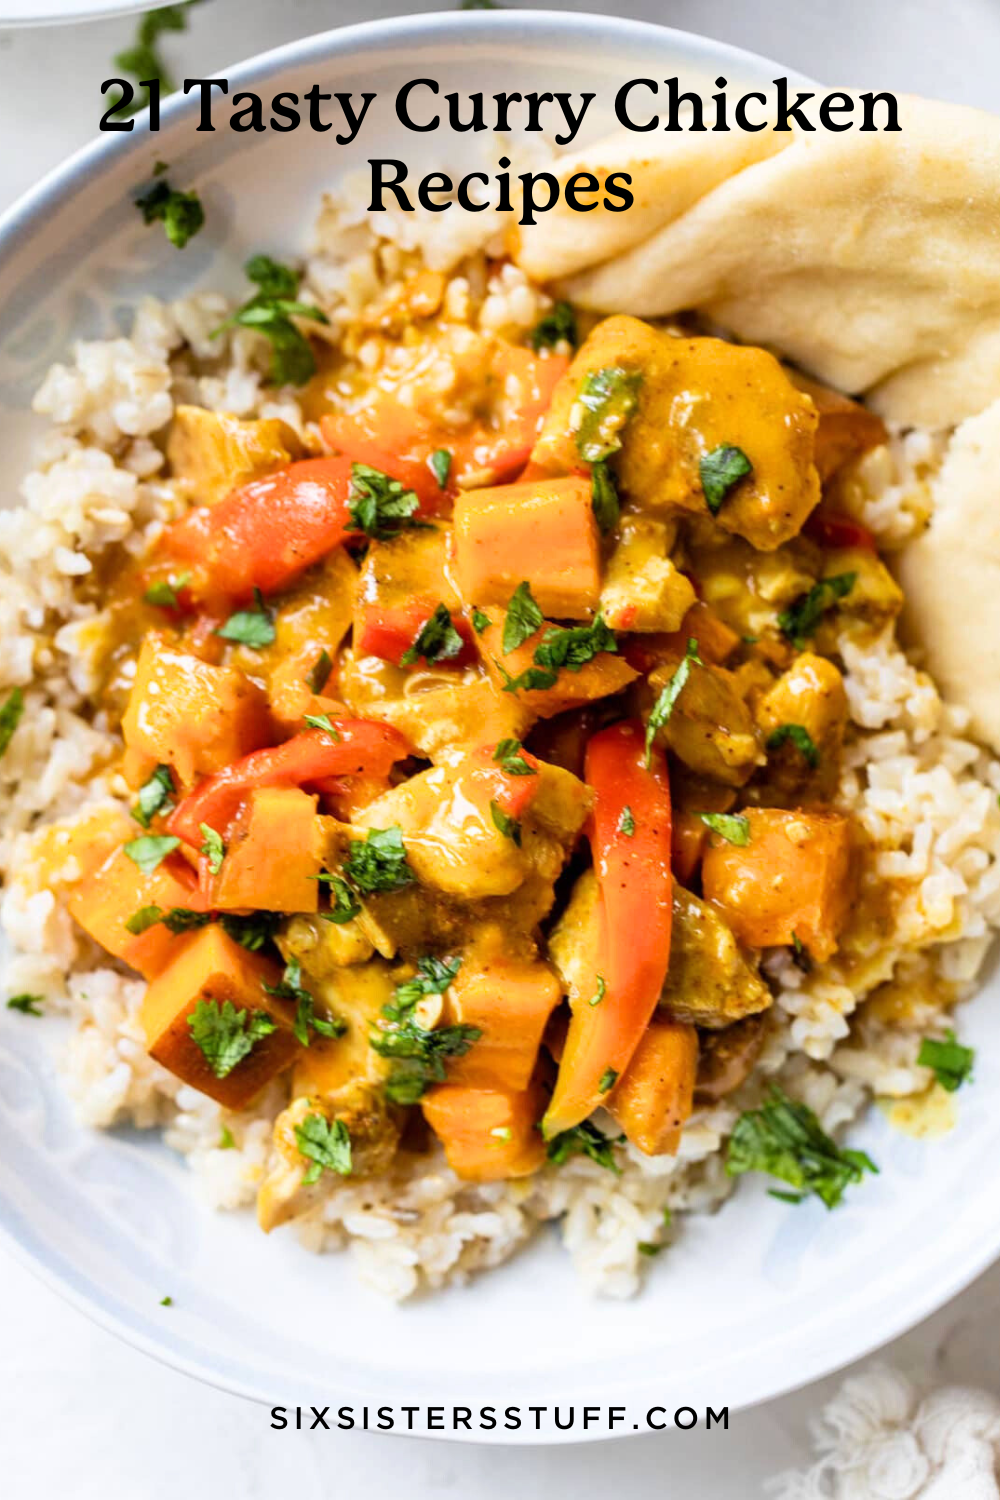 21 Tasty Curry Chicken Recipes